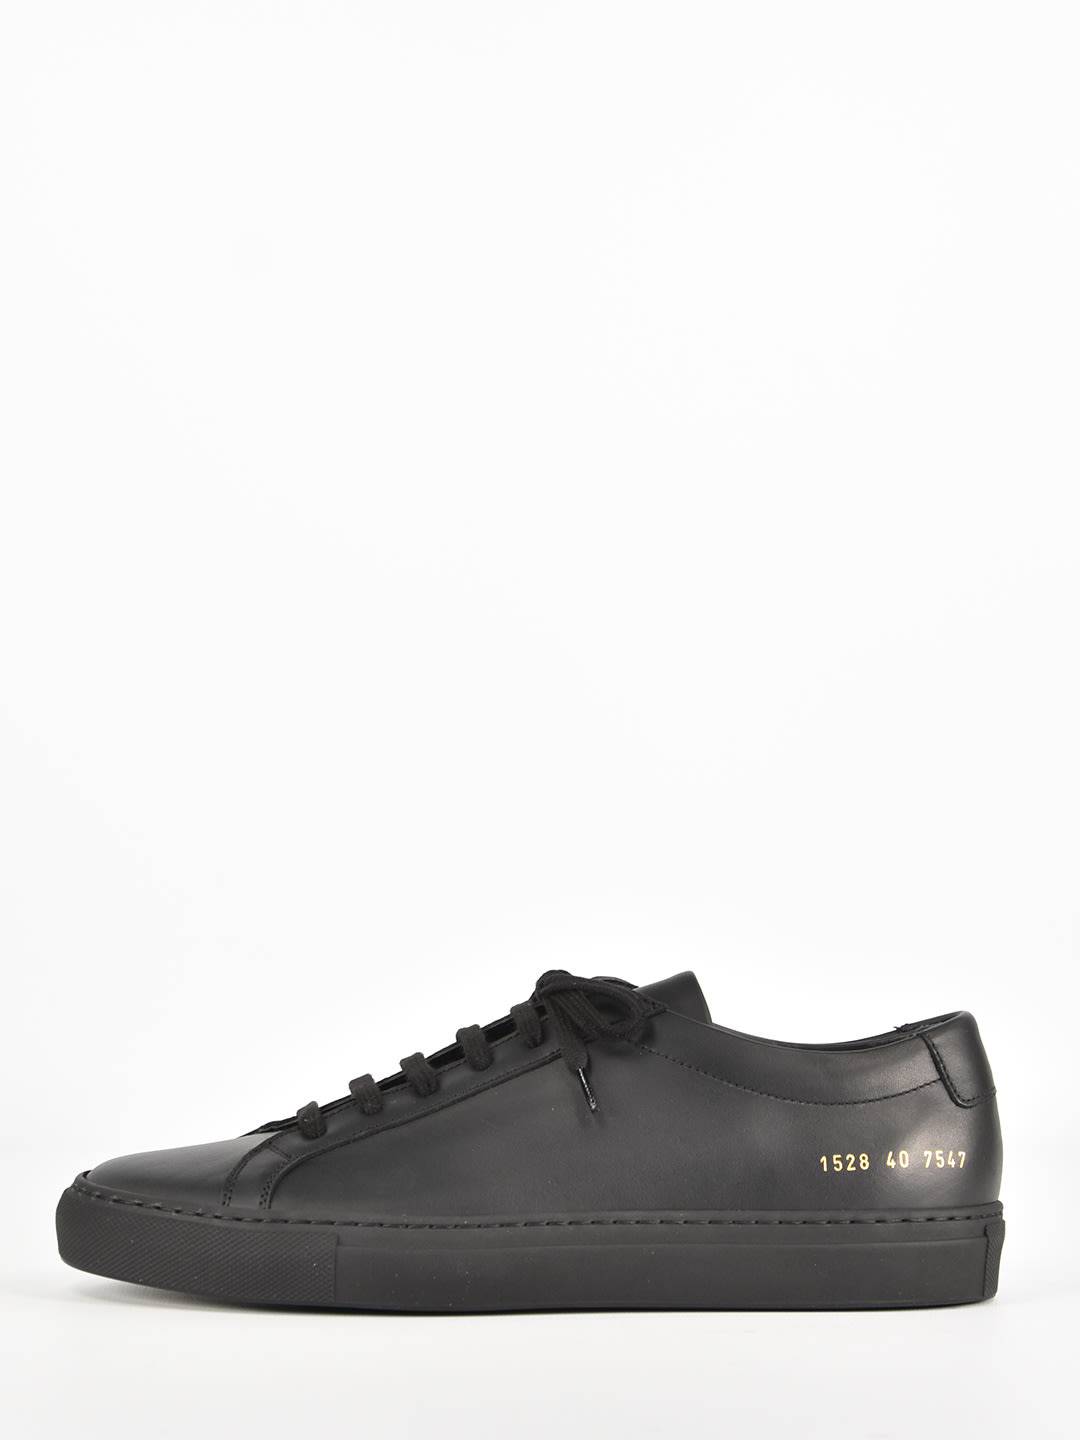 COMMON PROJECTS BLACK ACHILLES trainers,15287547